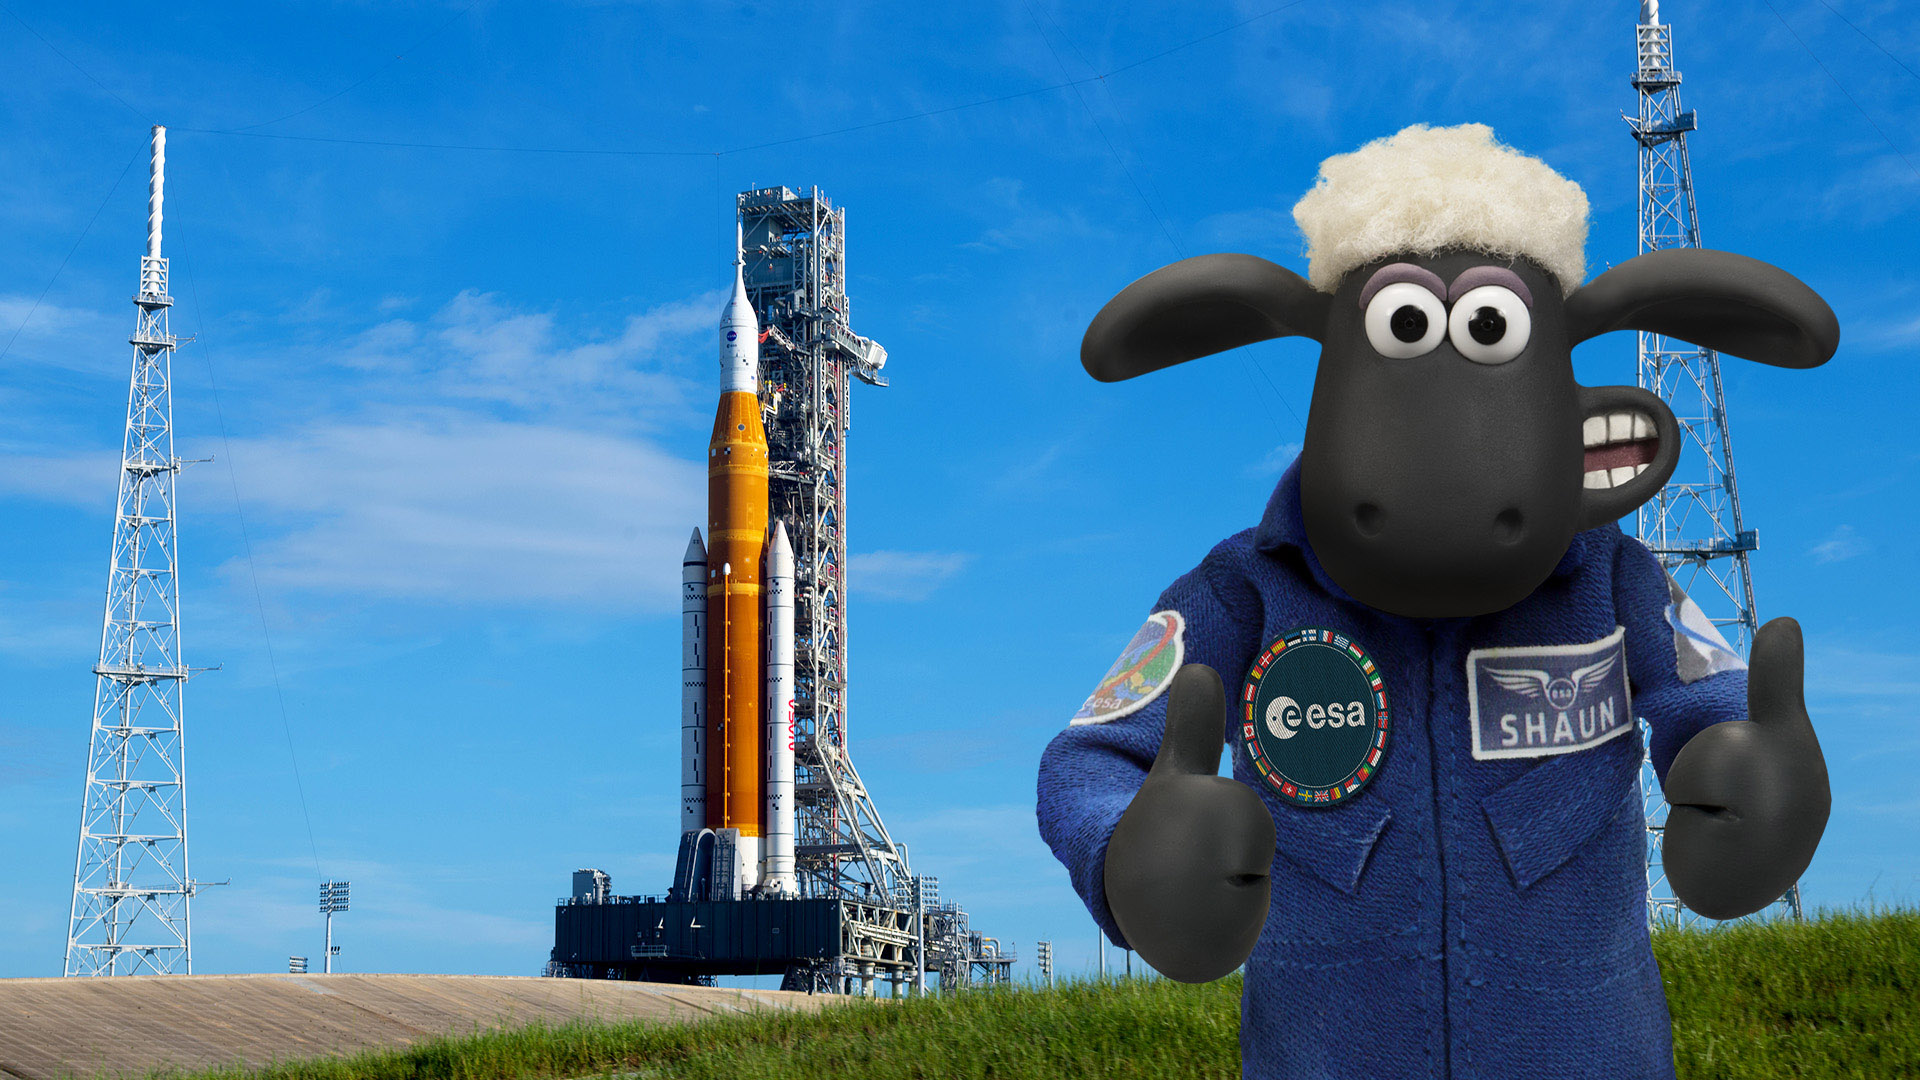 Shaun the Sheep Returns from the Moon